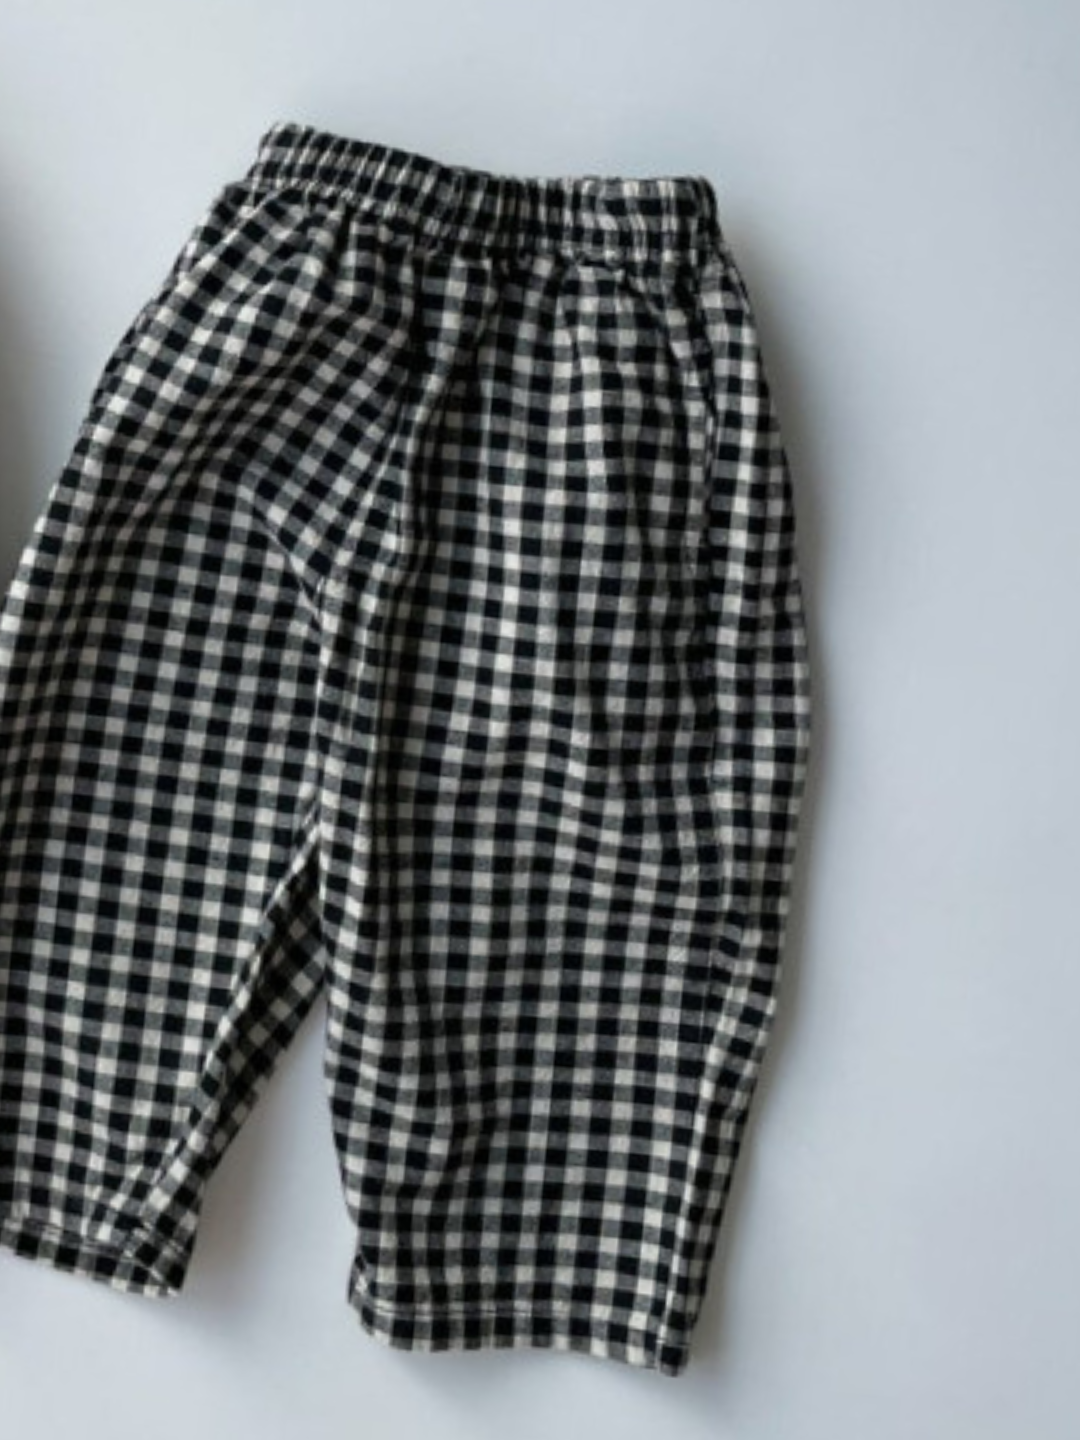 Kids black and off-white gingham check pants laid on a white background.